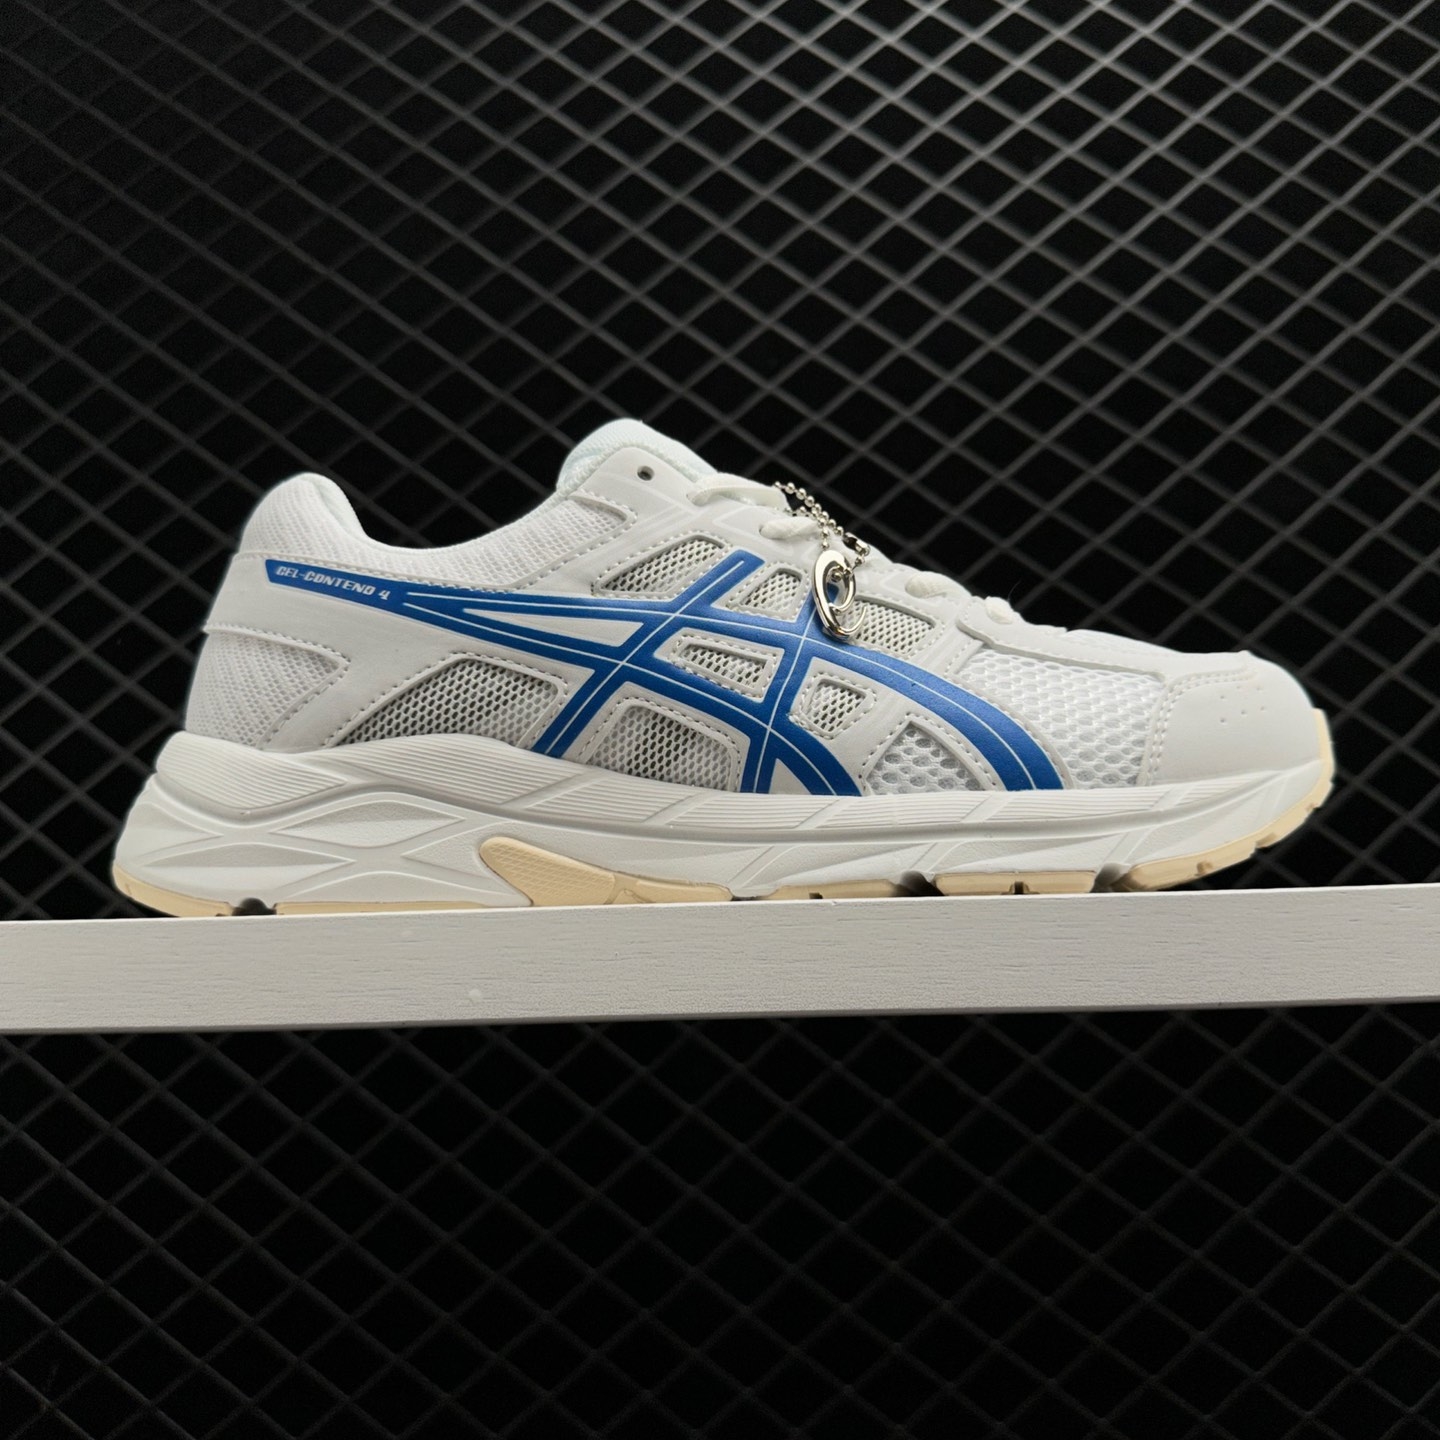 Asics Gel-Contend 4 White Blue Yellow - Stylish & Comfortable Athletic Shoes